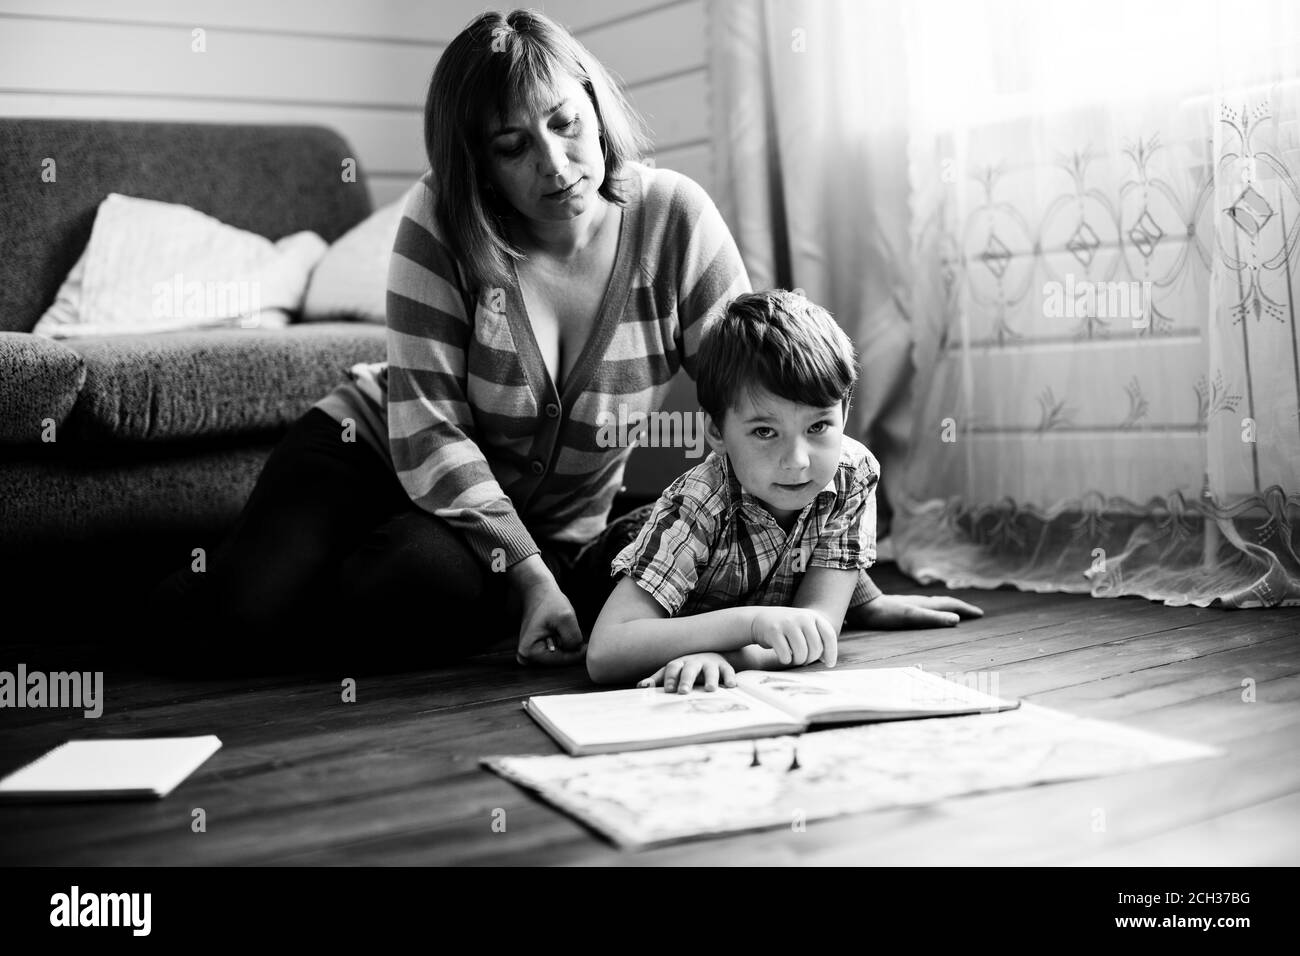 Woman reading a book with her little son on the floor in home. Black and white photo. Stock Photo